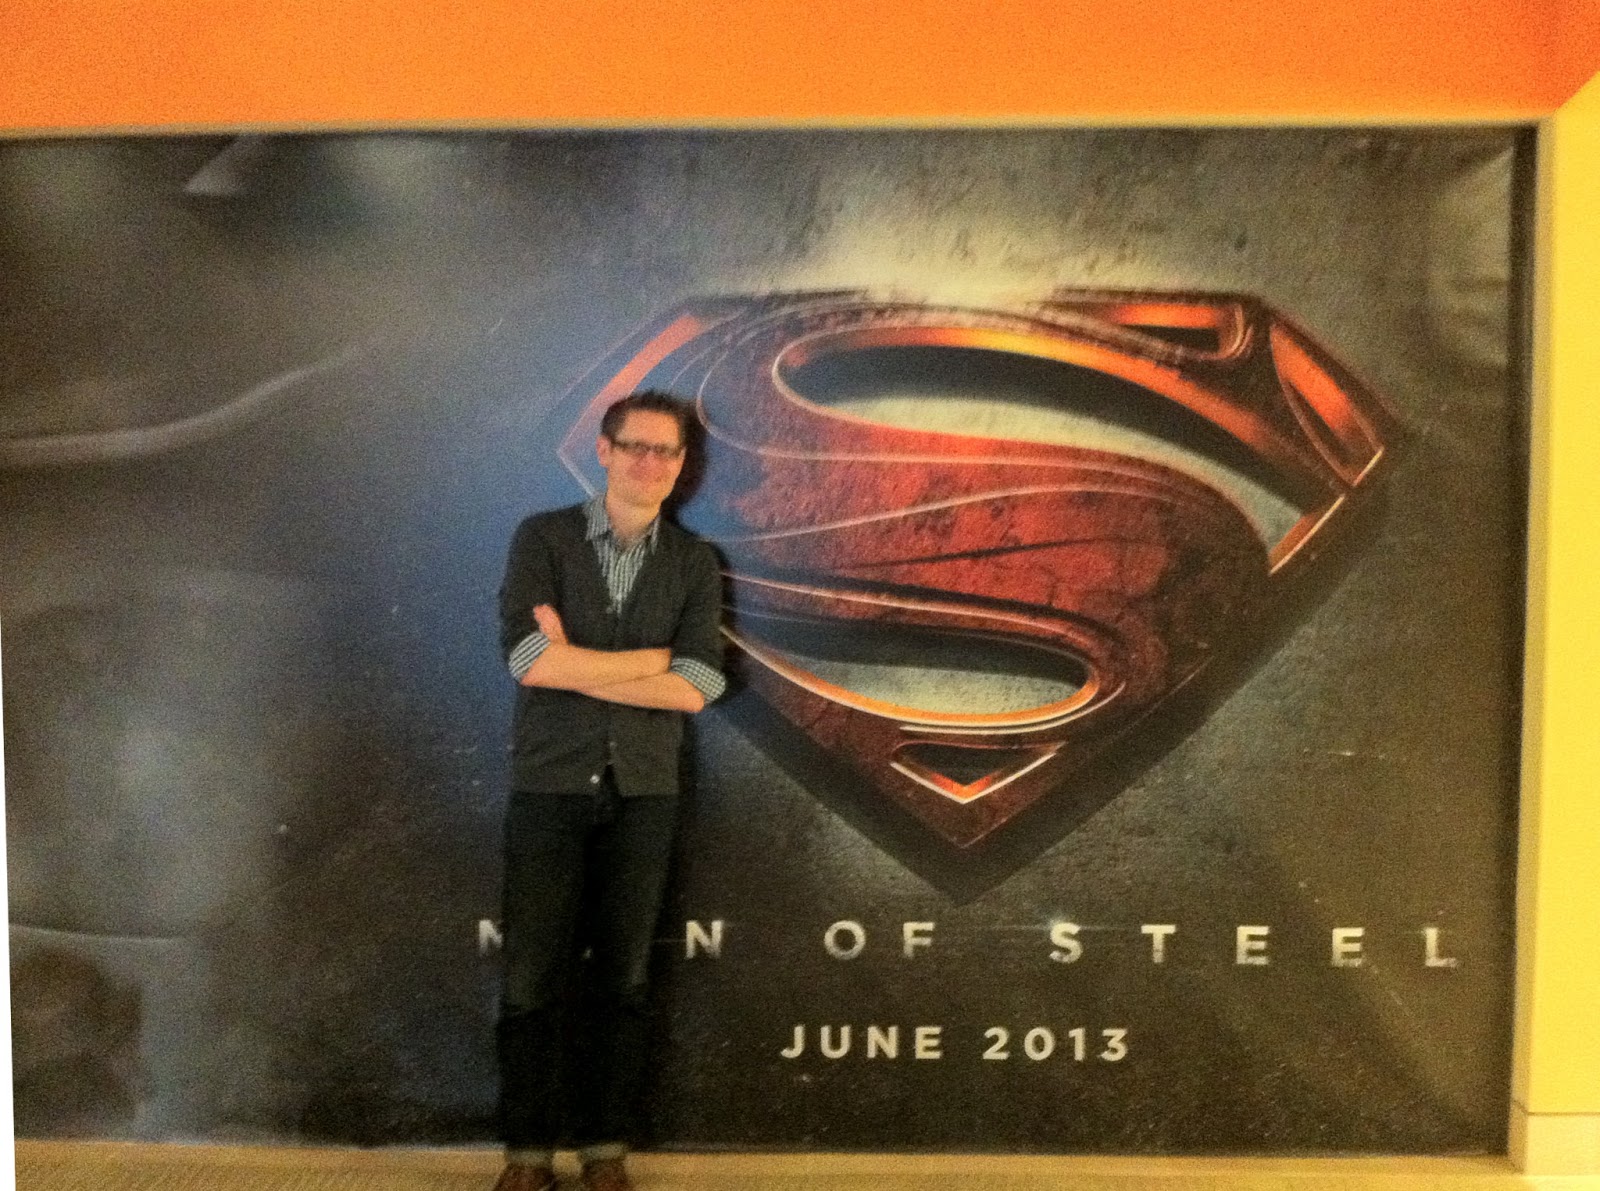 BOOK REVIEW – Man of Steel: Inside the Legendary World of Superman by  Daniel Wallace